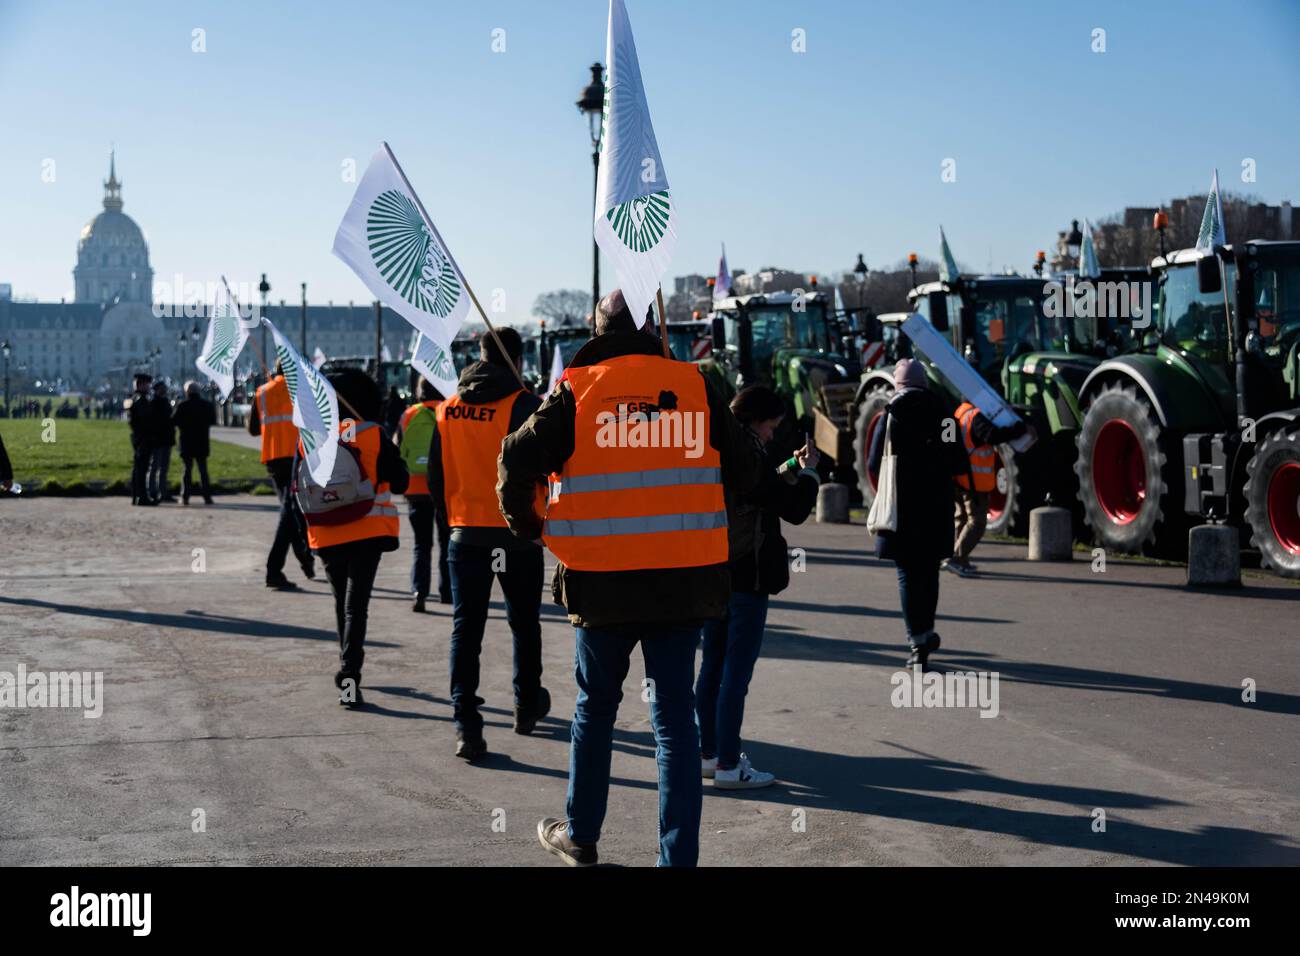 https://c8.alamy.com/comp/2N49K0M/paris-france-08022023-several-thousand-farmers-from-all-over-france-including-500-on-tractors-led-by-the-main-union-the-fnsea-converged-on-paris-to-denounce-the-constraints-on-their-profession-in-particular-the-restrictions-on-the-use-of-pesticides-especially-in-sugar-beet-cultivation-bee-killing-insecticides-paris-france-on-february-08-2023-photo-by-pierrick-villetteabacapresscom-2N49K0M.jpg